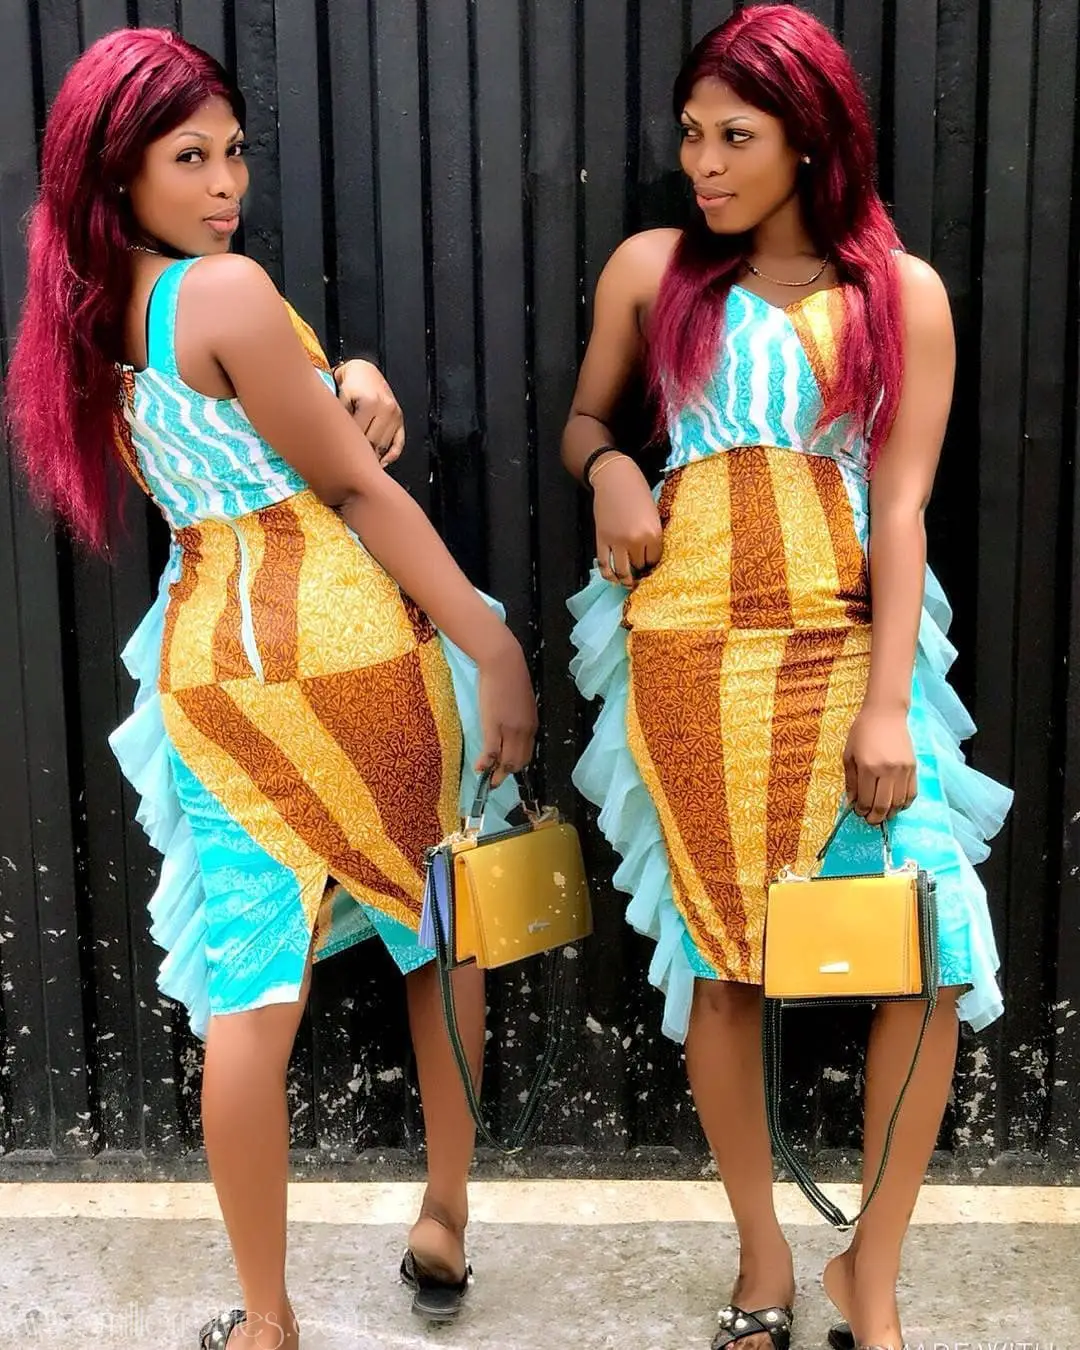 What Do You Think Of These Fav Ankara Styles?